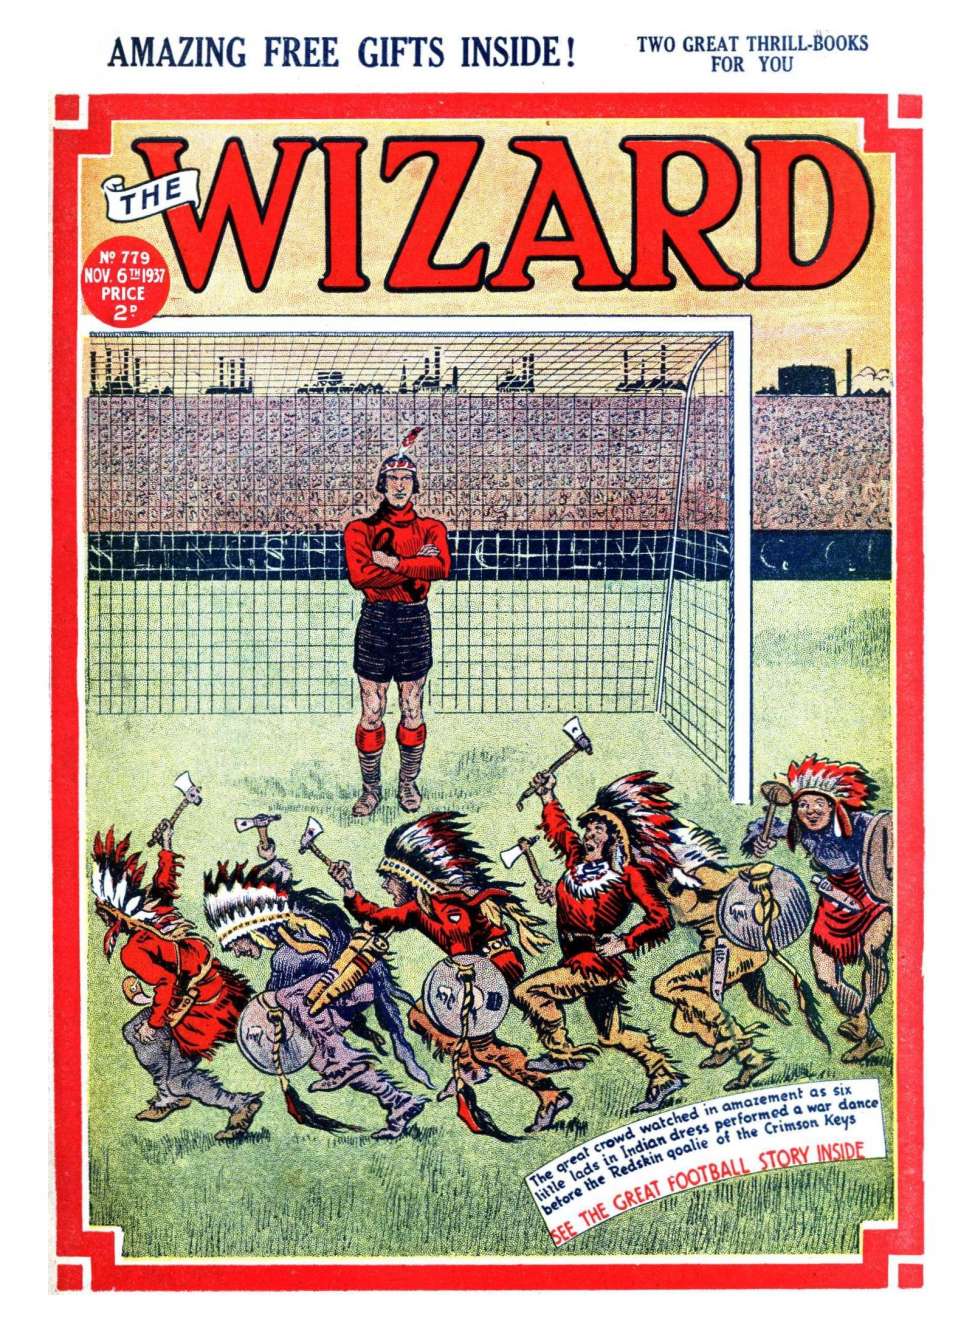 Book Cover For The Wizard 779